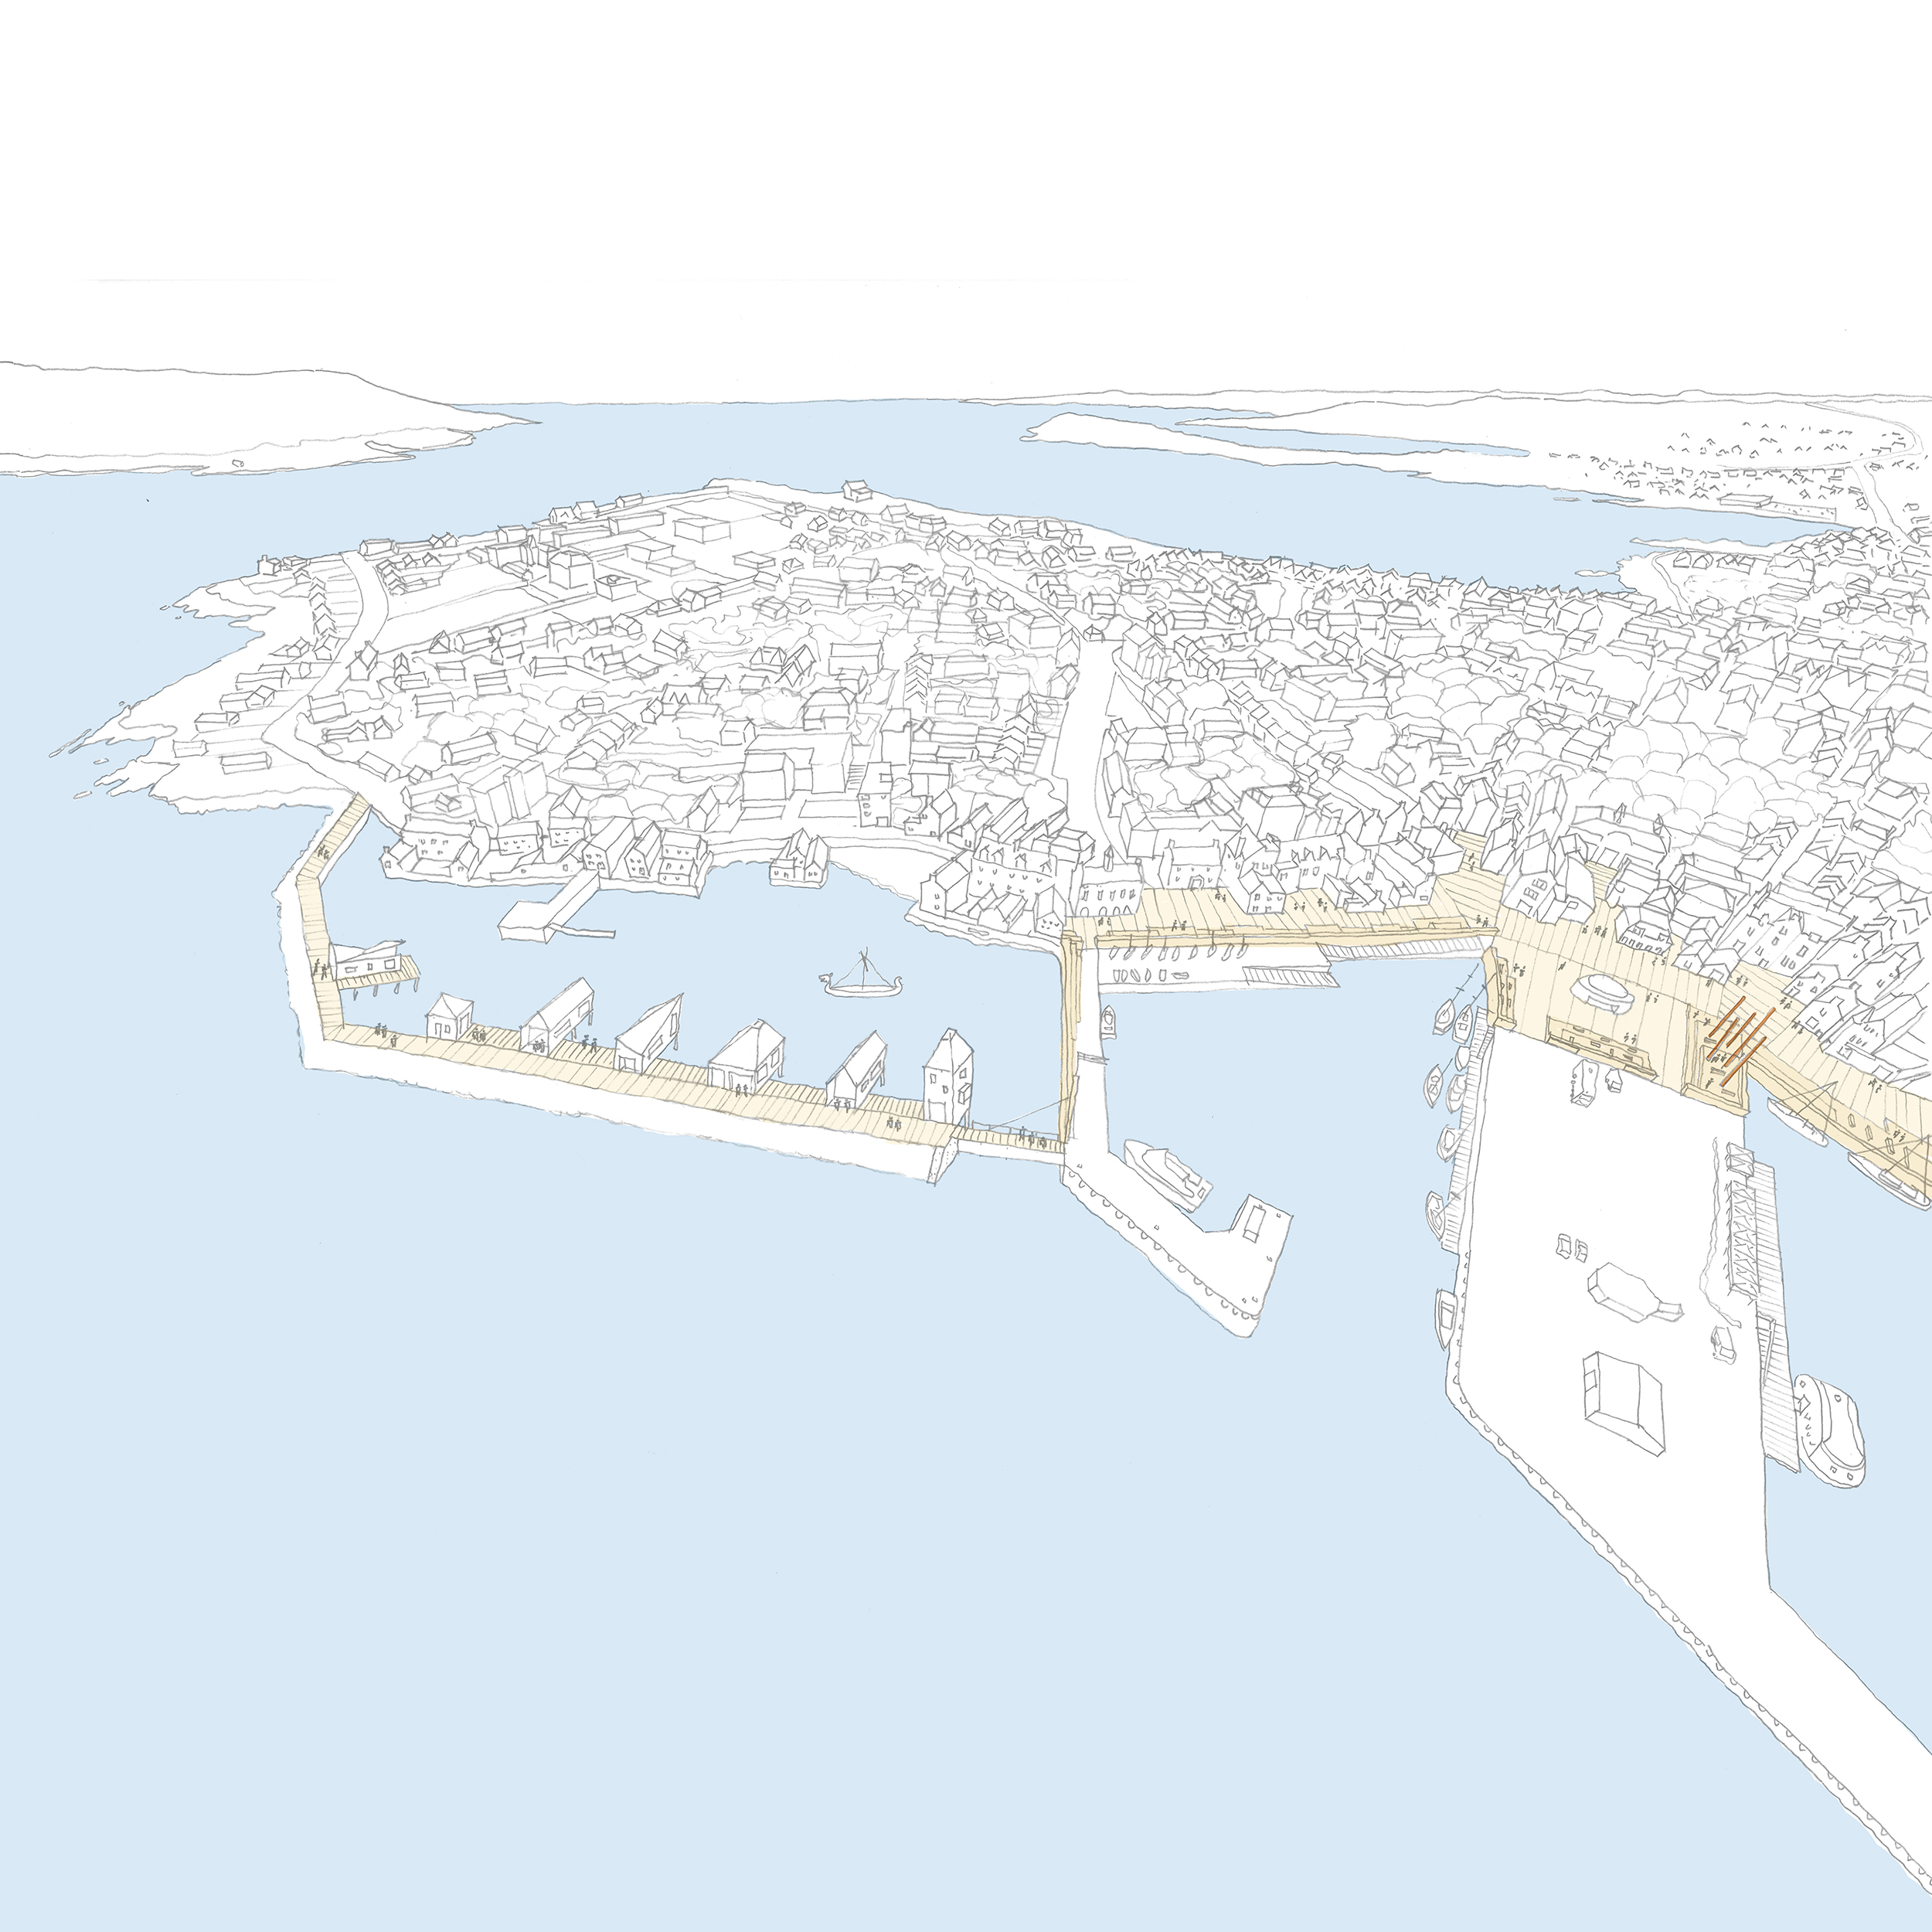 A birds-eye view of Lerwick harbour sketched proposal